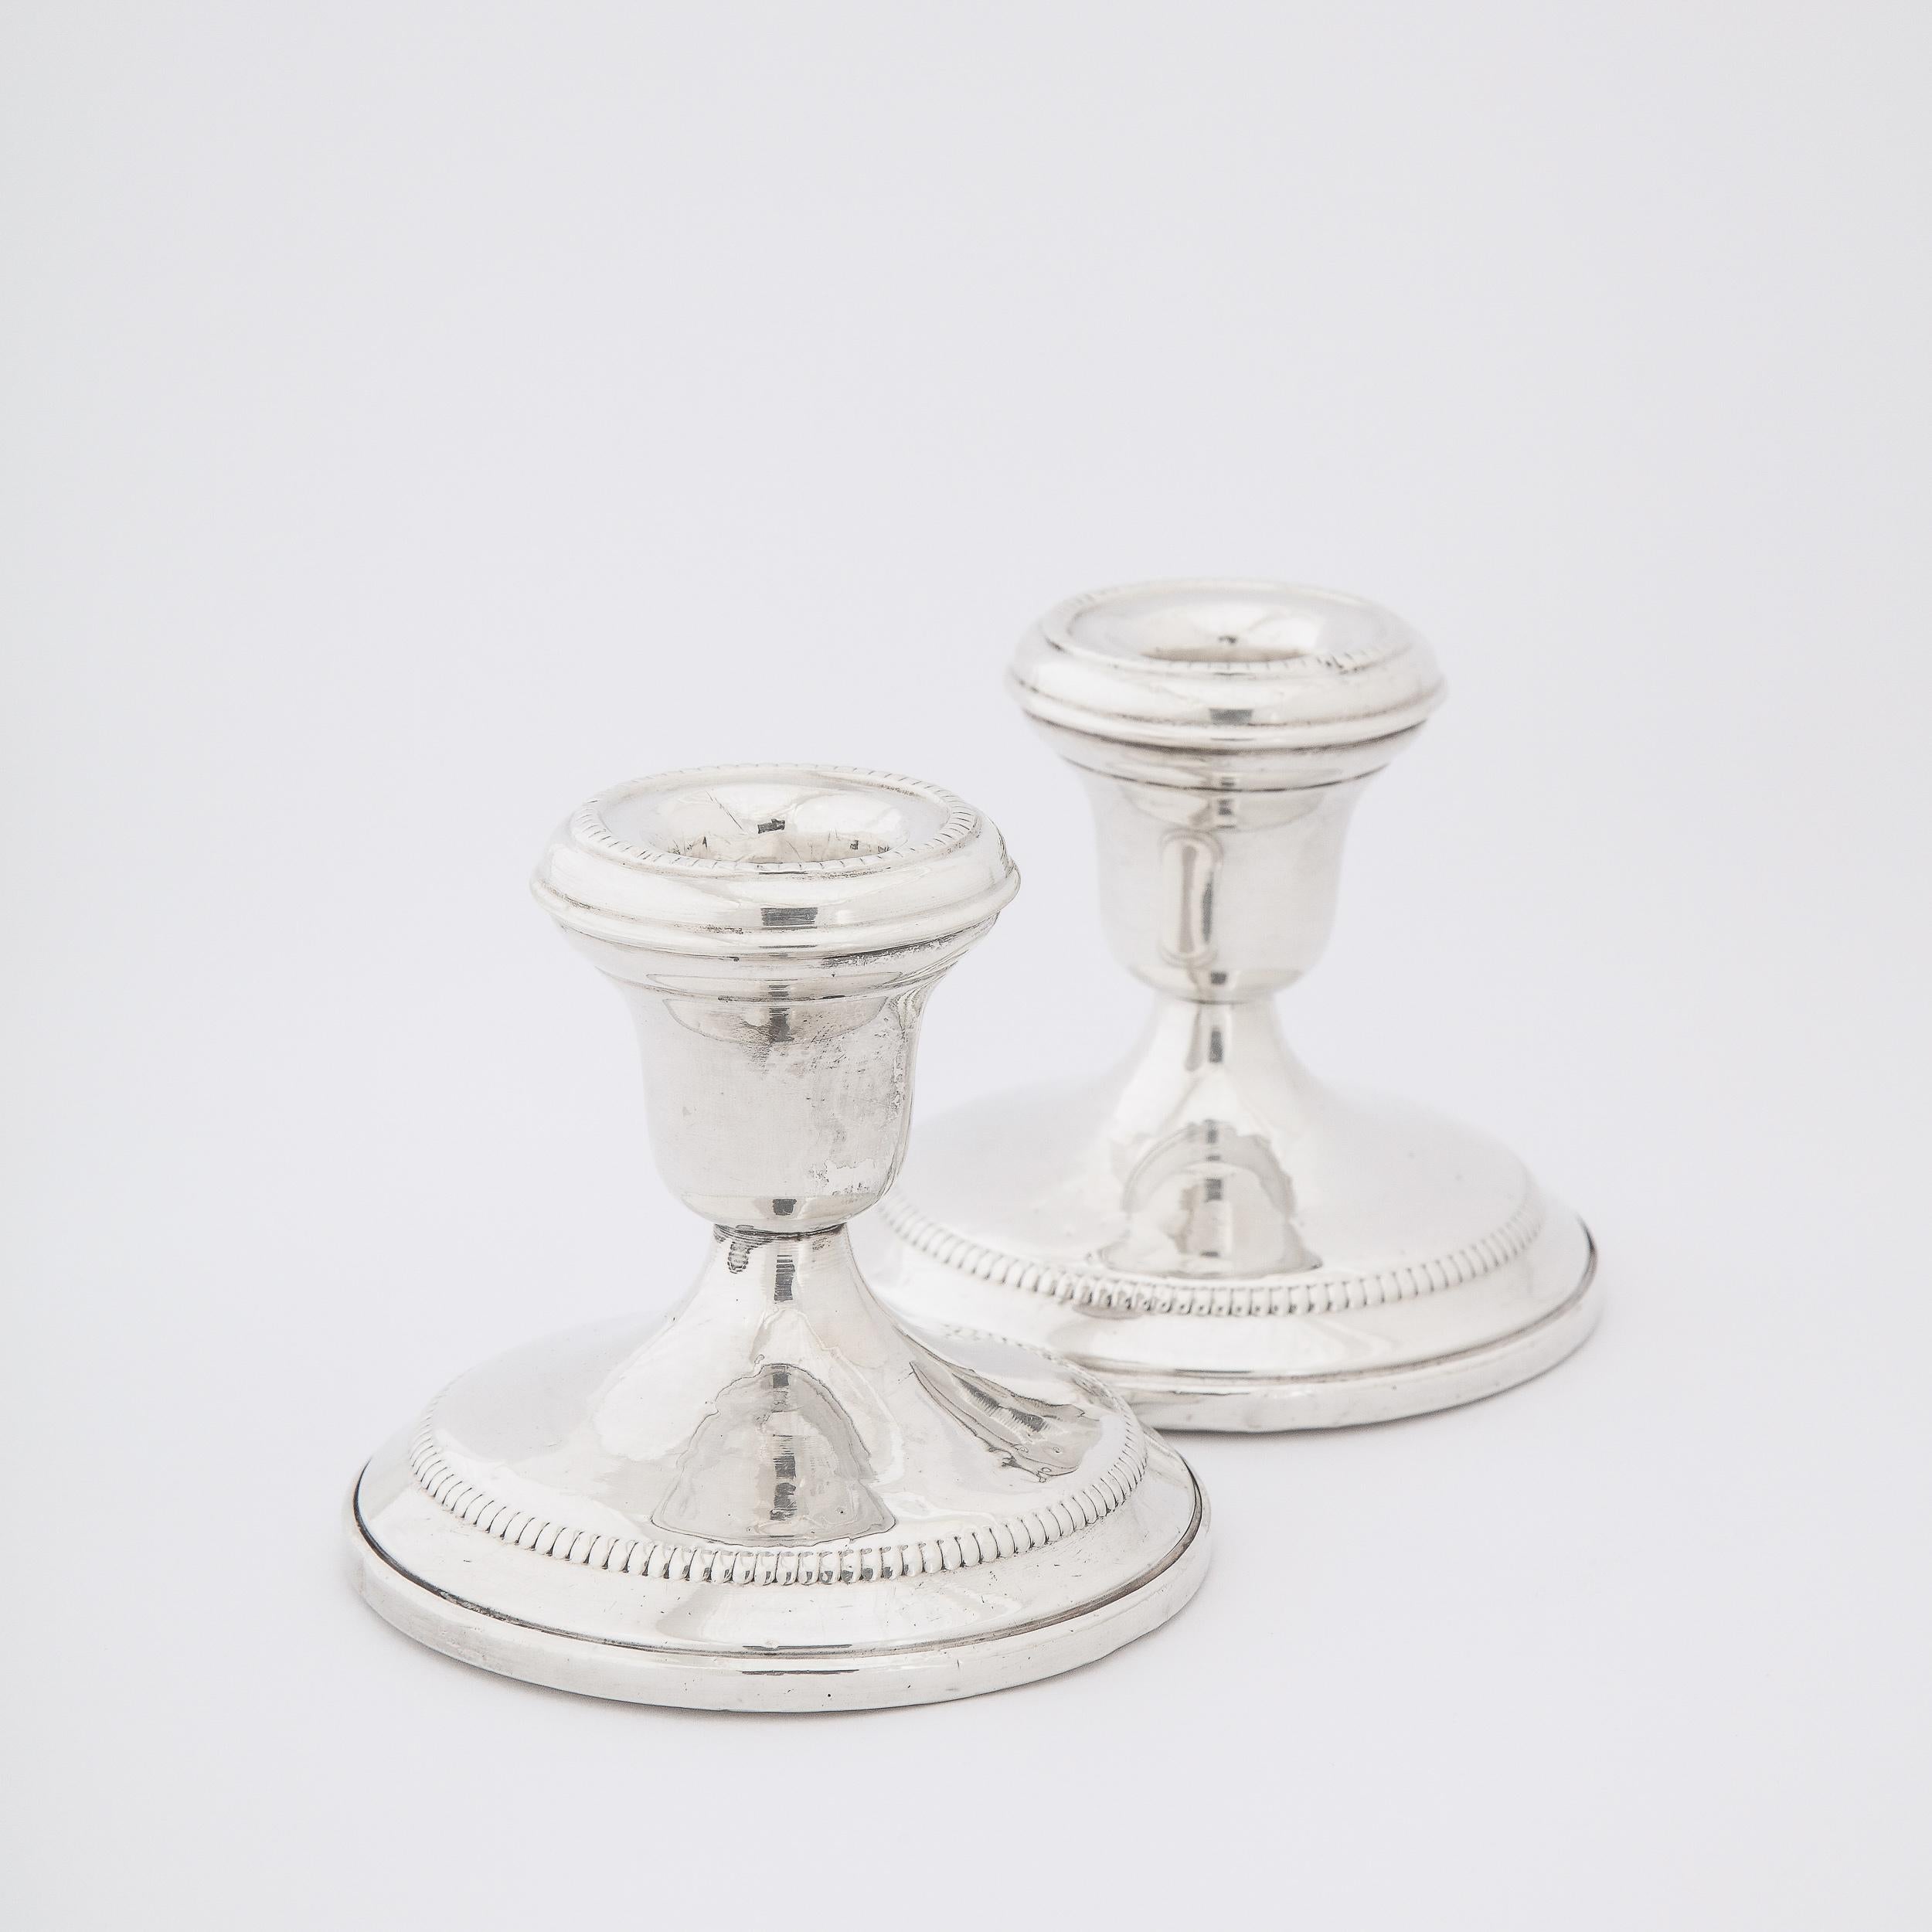 American Mid-Century Modern Sterling Silver Candlesticks with Beaded Detailing